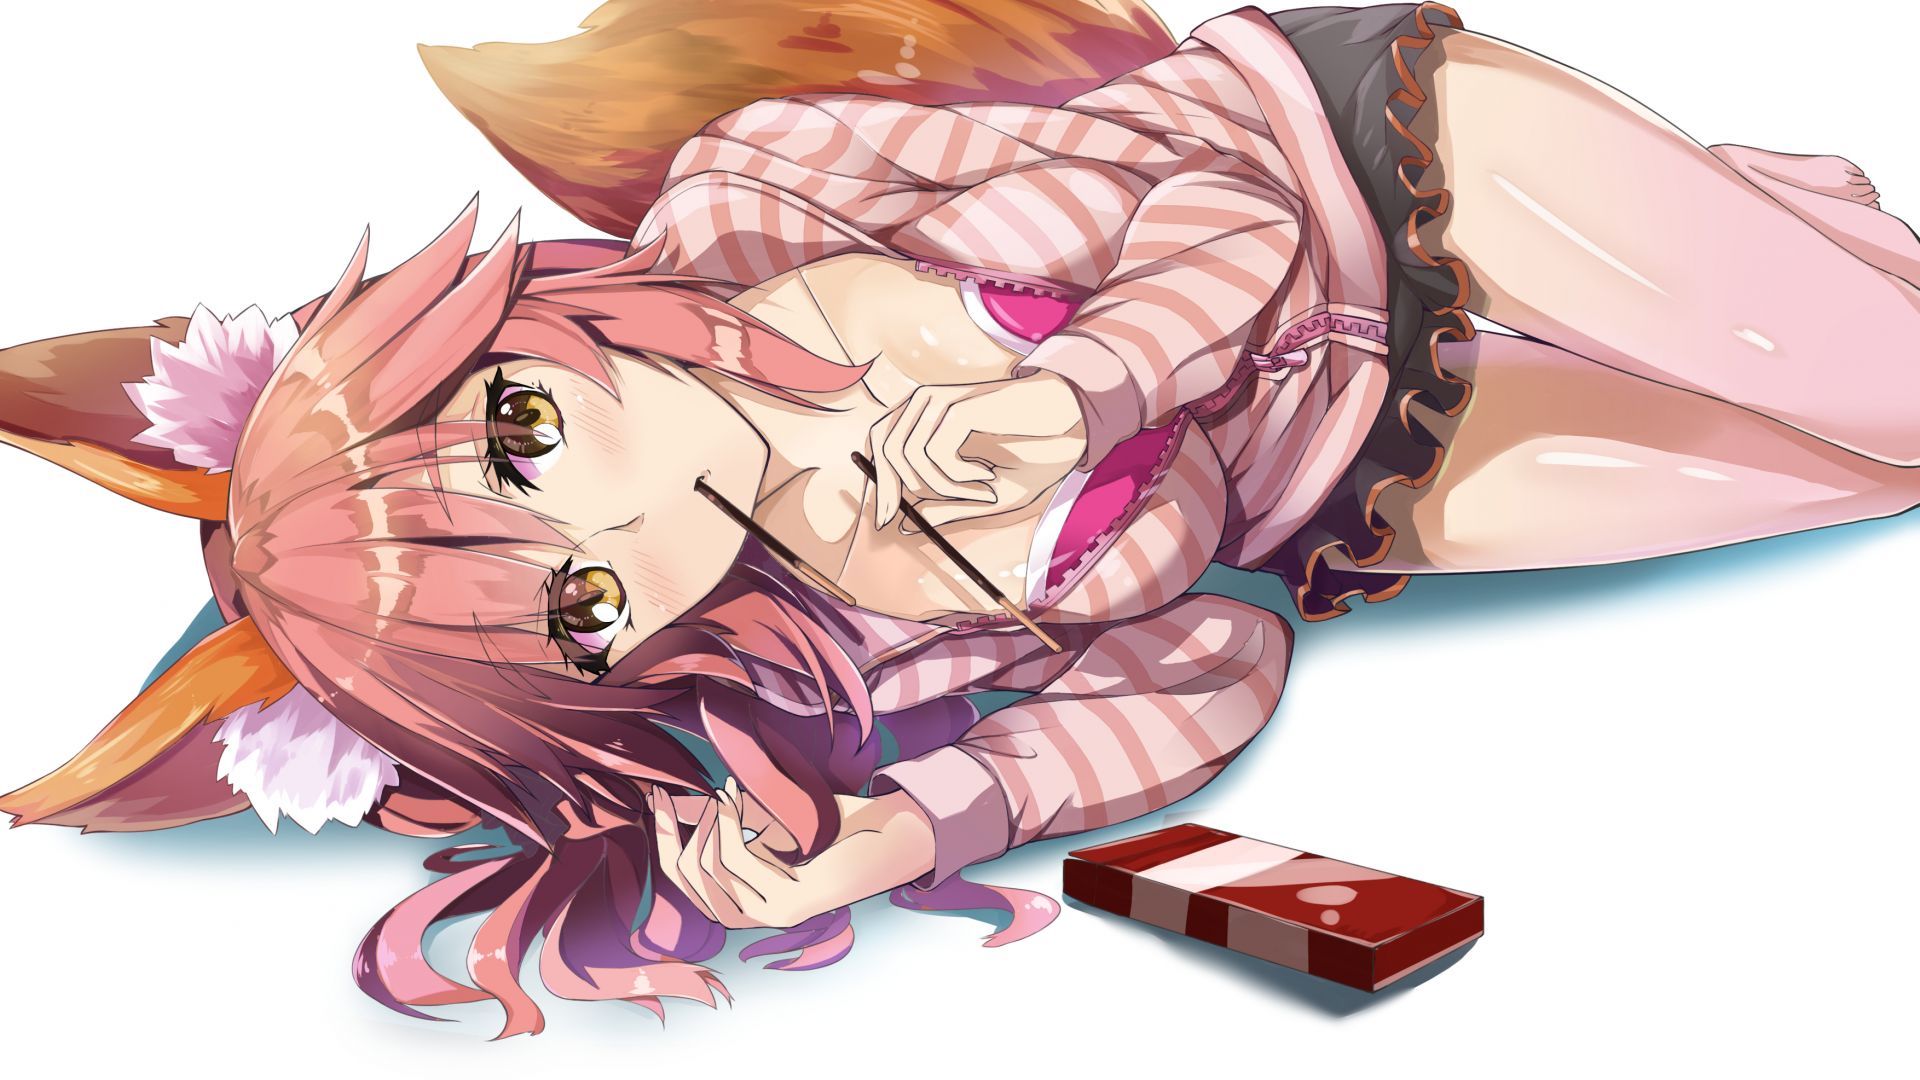 Wallpaper Caster, fate/stay night, anime girl, lying down